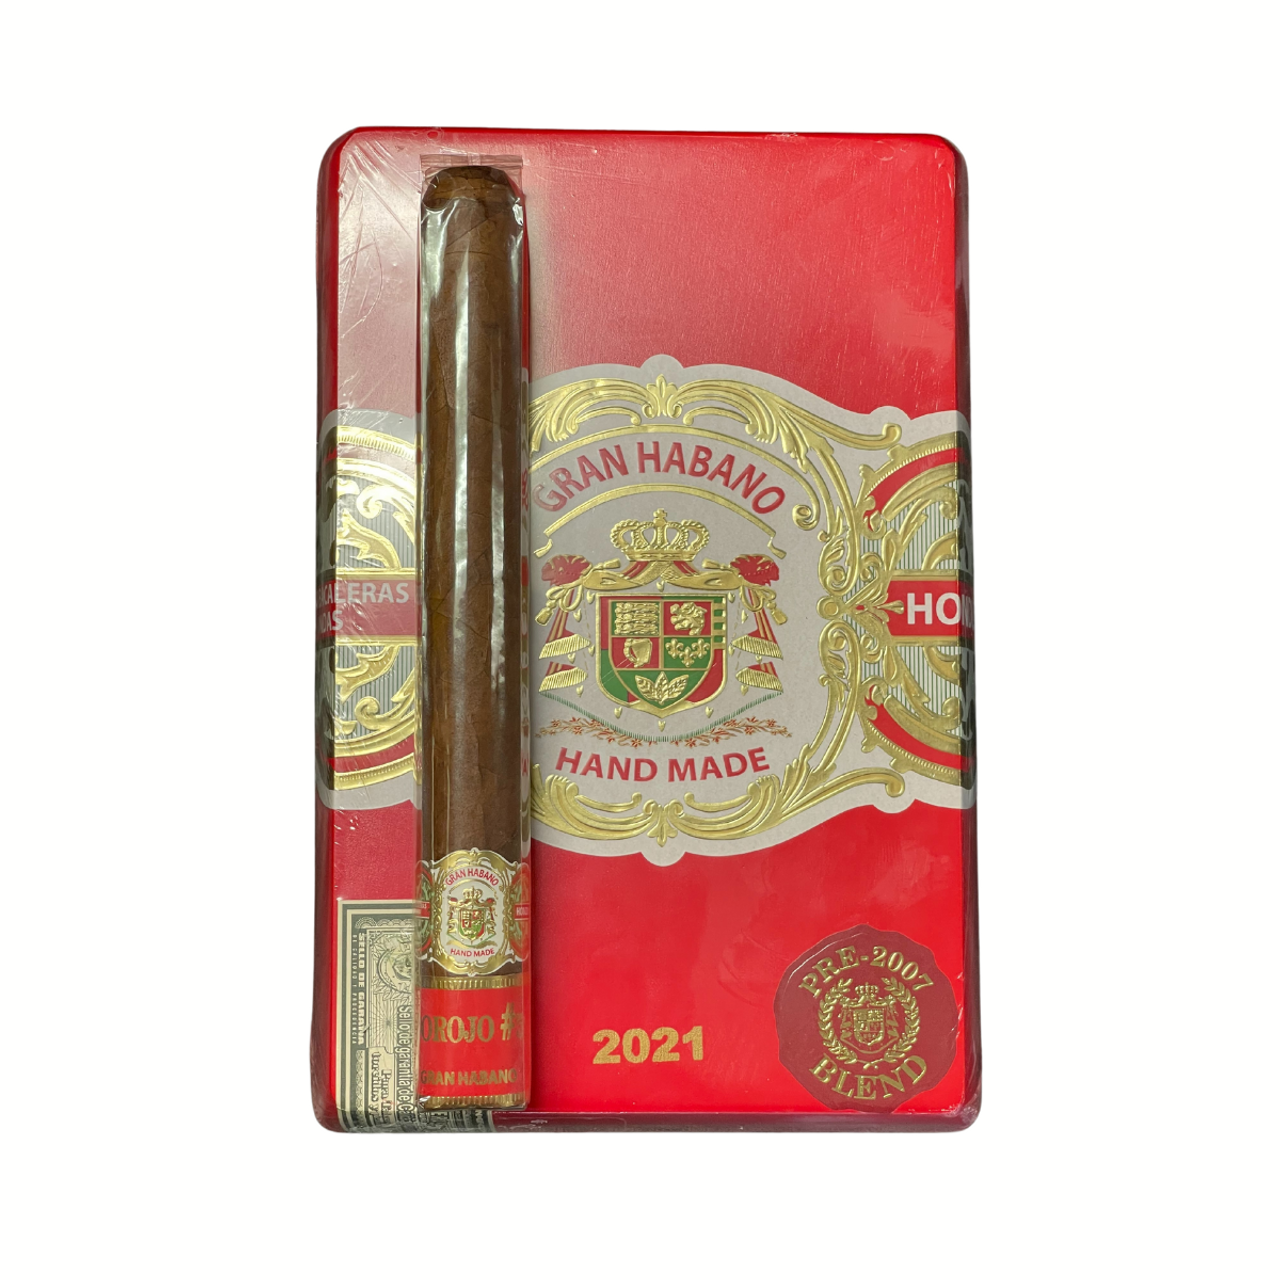 Gran Habano #5 Corojo Triumph ( 7 1/2 X 58 ) Box 20 with FREE shipping from cigarsamplers.com makes you a winners! Full-body, Full-flavor, Full-sized, NOT Full-price. Boom!!!